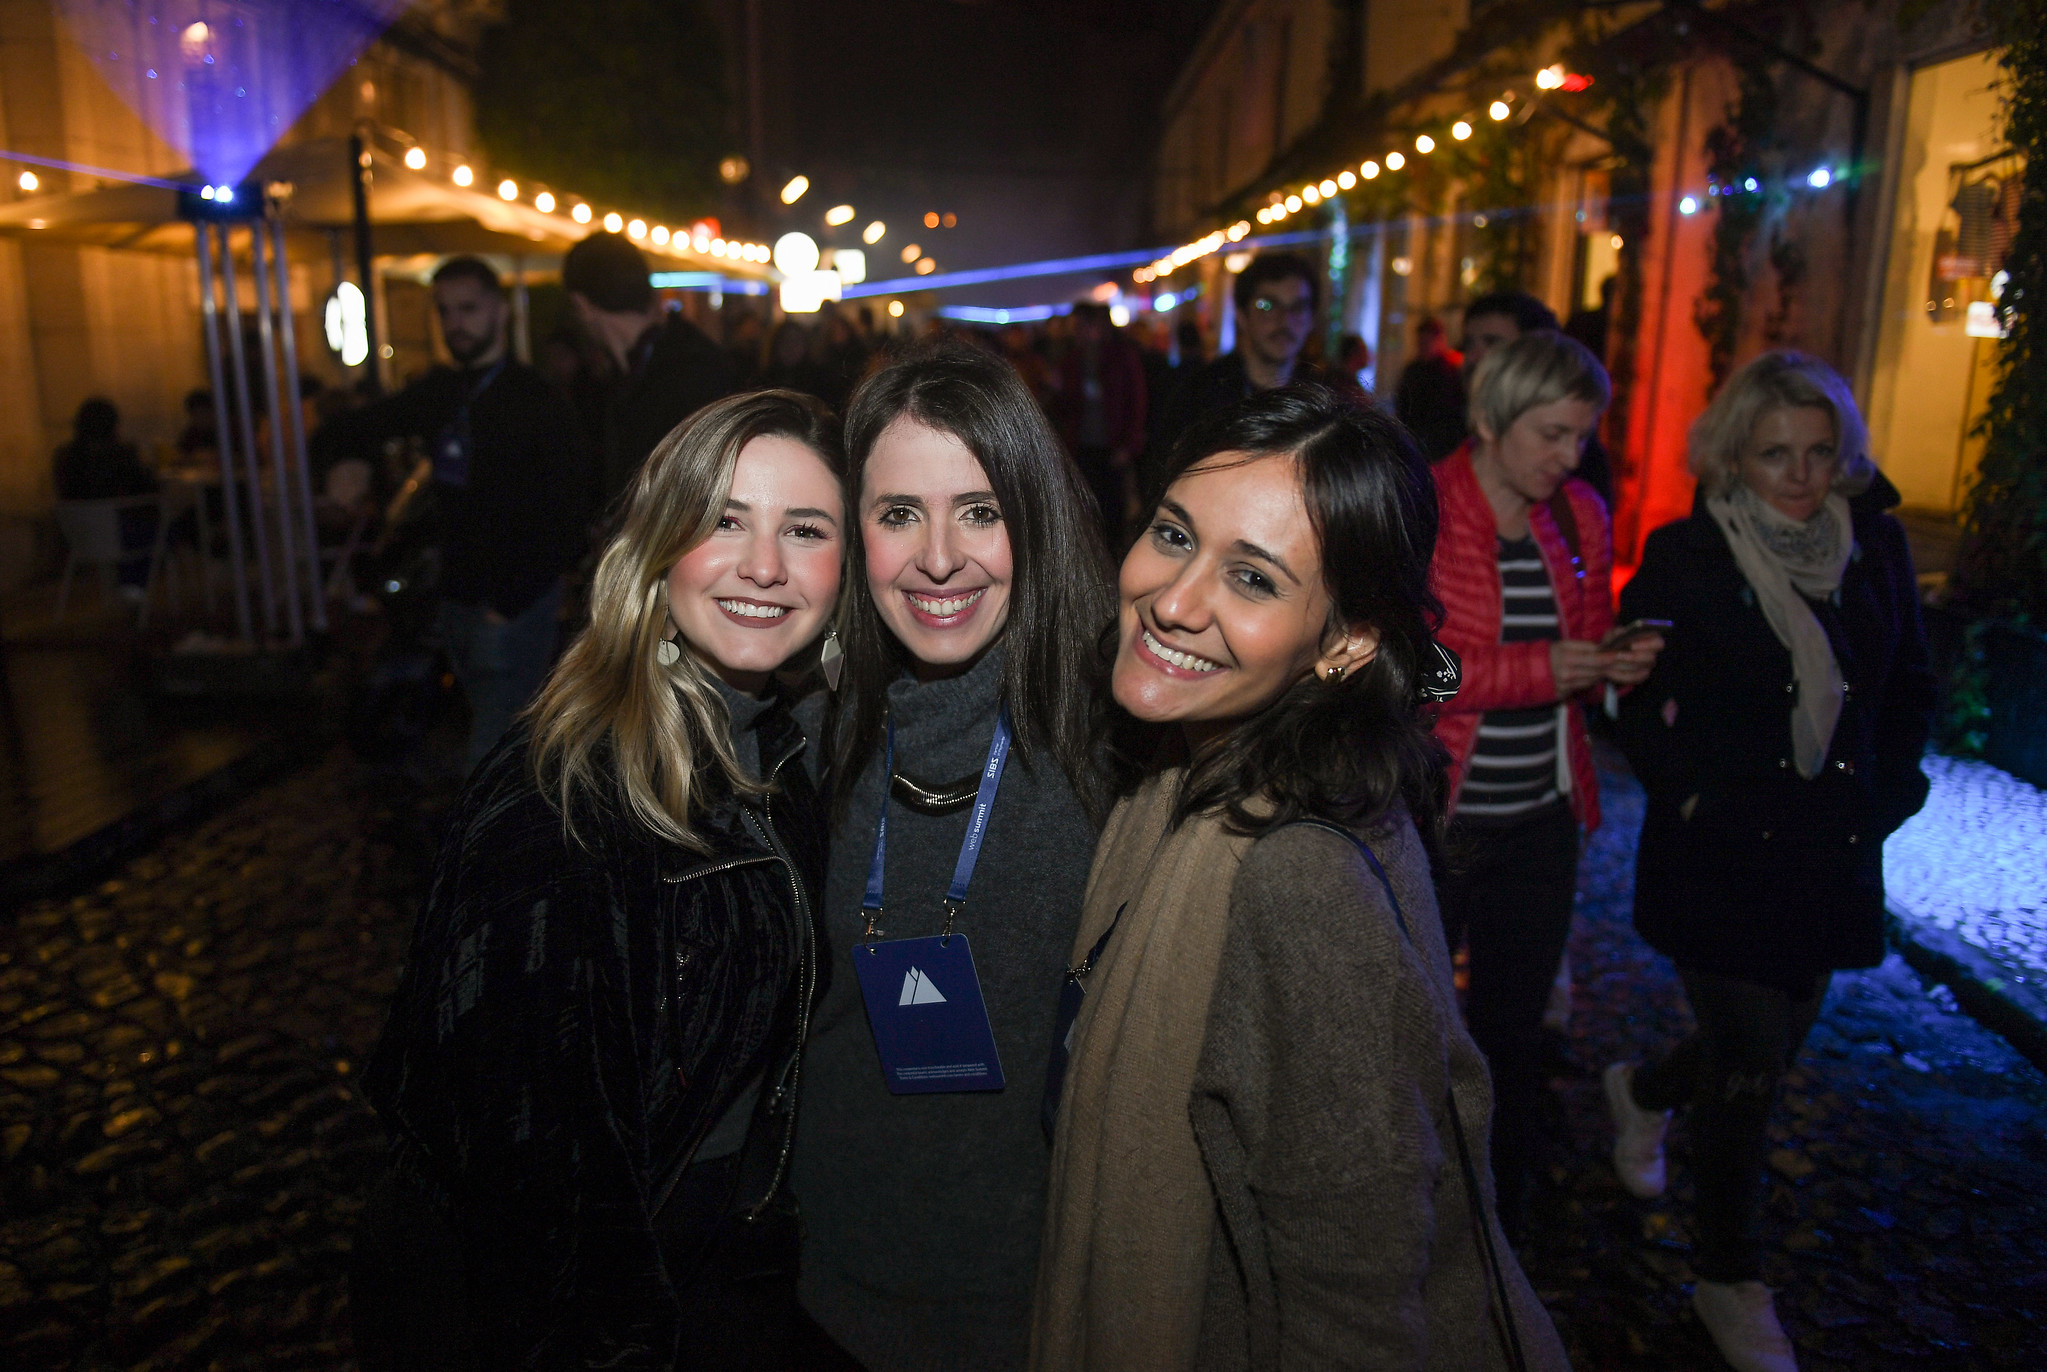 Three smiling people hug each other and look directly into the camera lens. The person in the centre is wearing a lanyard with the Web Summit logo. Behind them is a cobbled street full of people. It's night time. This is Night Summit at LX Factory in Lisbon.